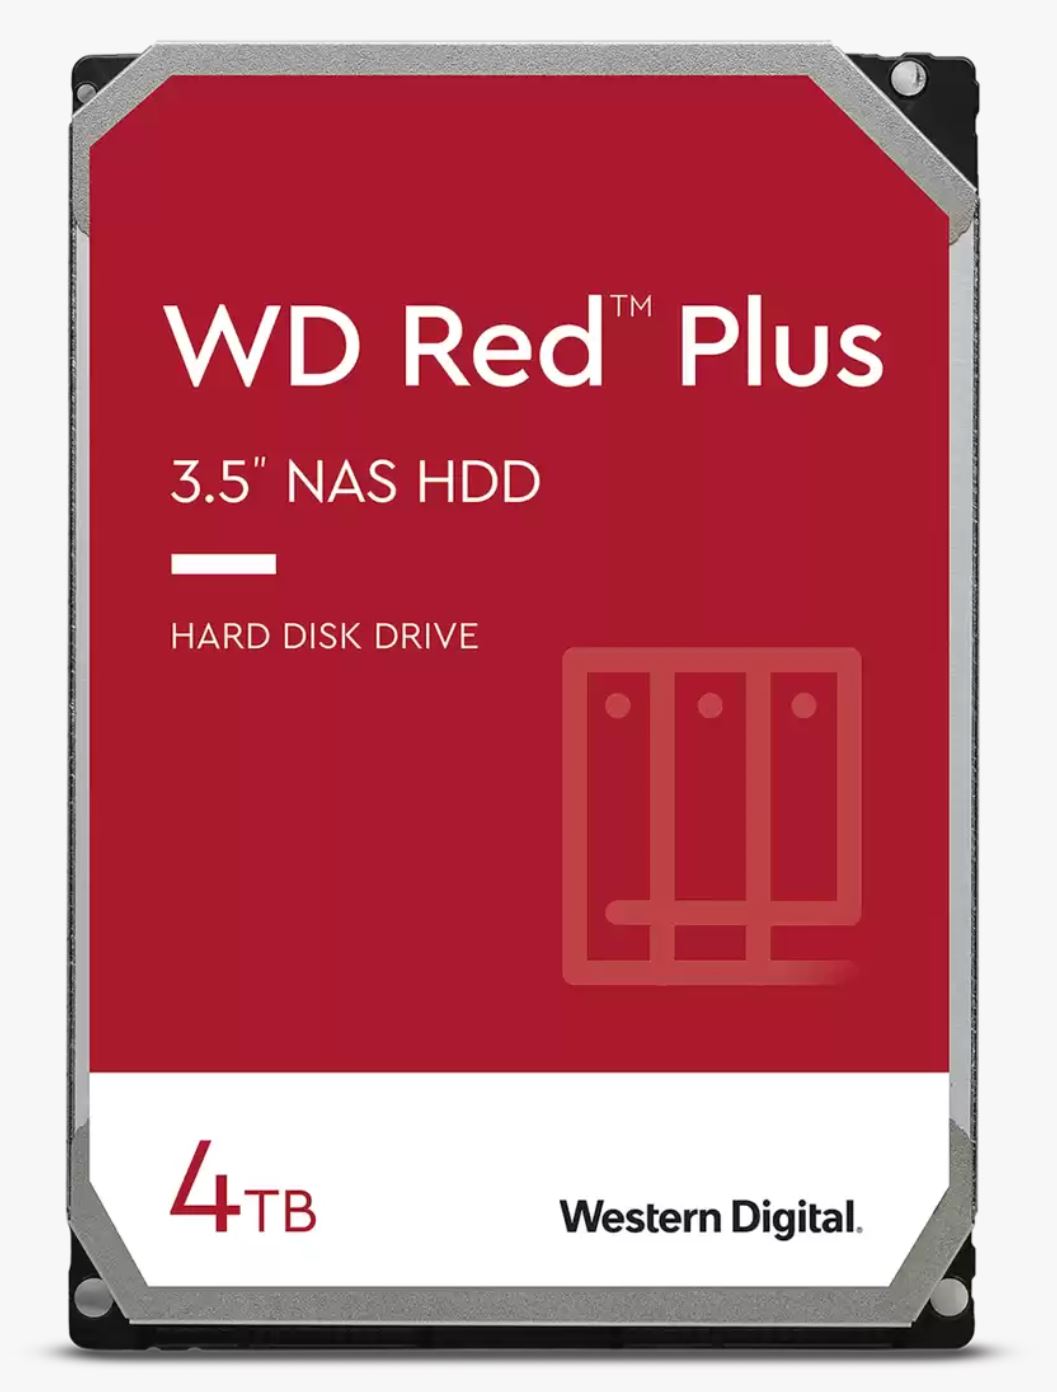 WD RED PLUS NAS HDD (WD40EFZX) 4TB/SATA3/128MB/3.5″